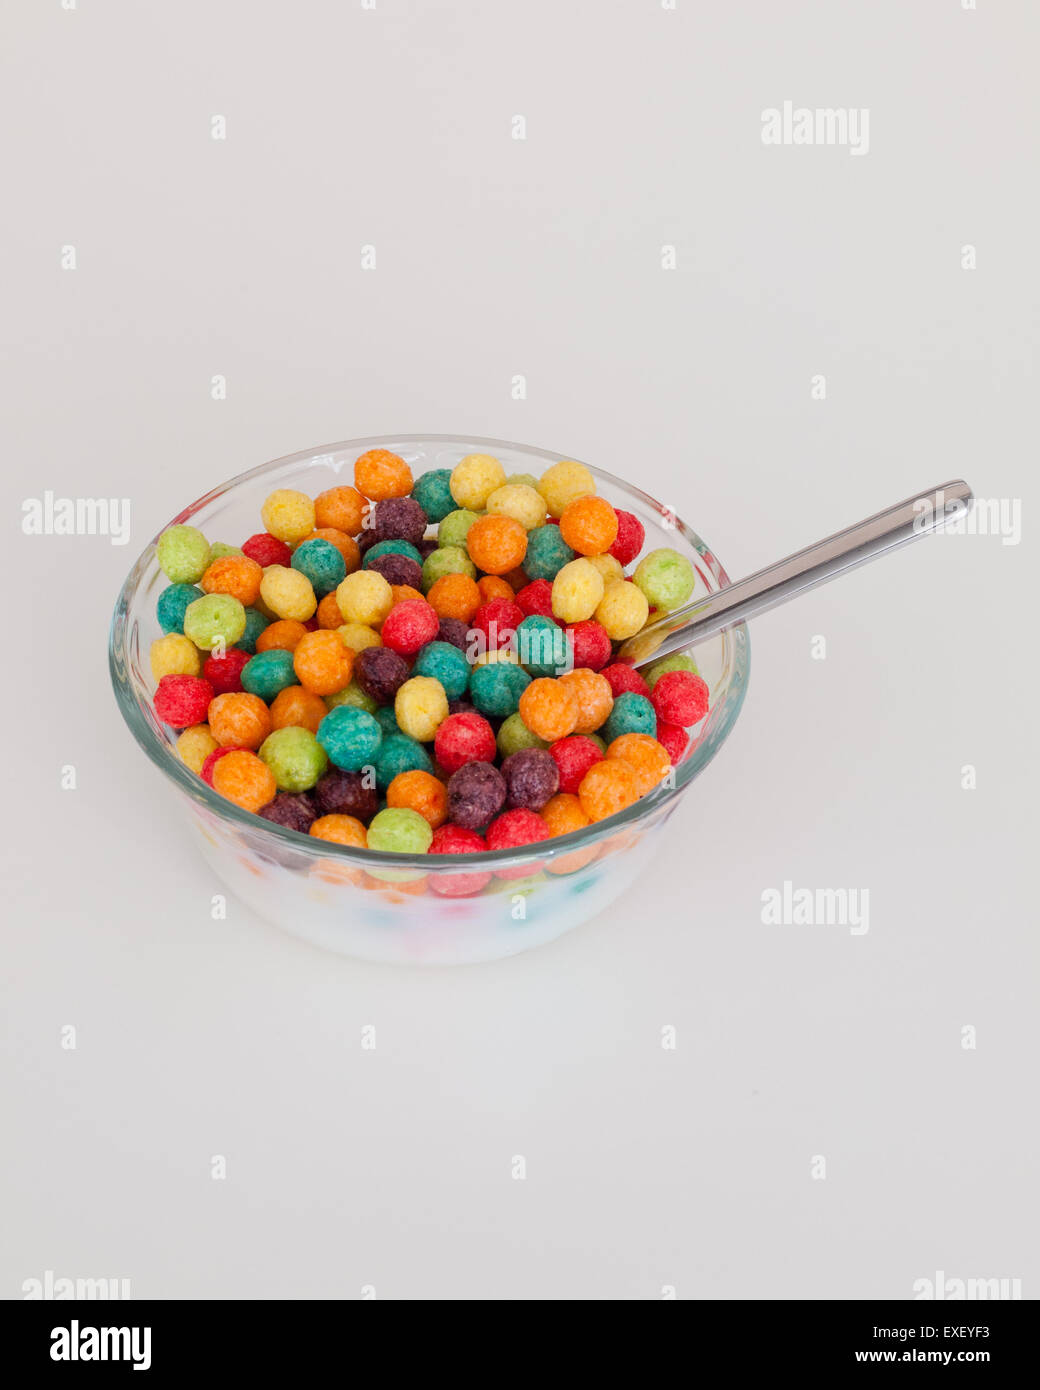 A bowl of colourful Trix cereal, a kiddie breakfast cereal produced by General Mills, Inc. Stock Photo